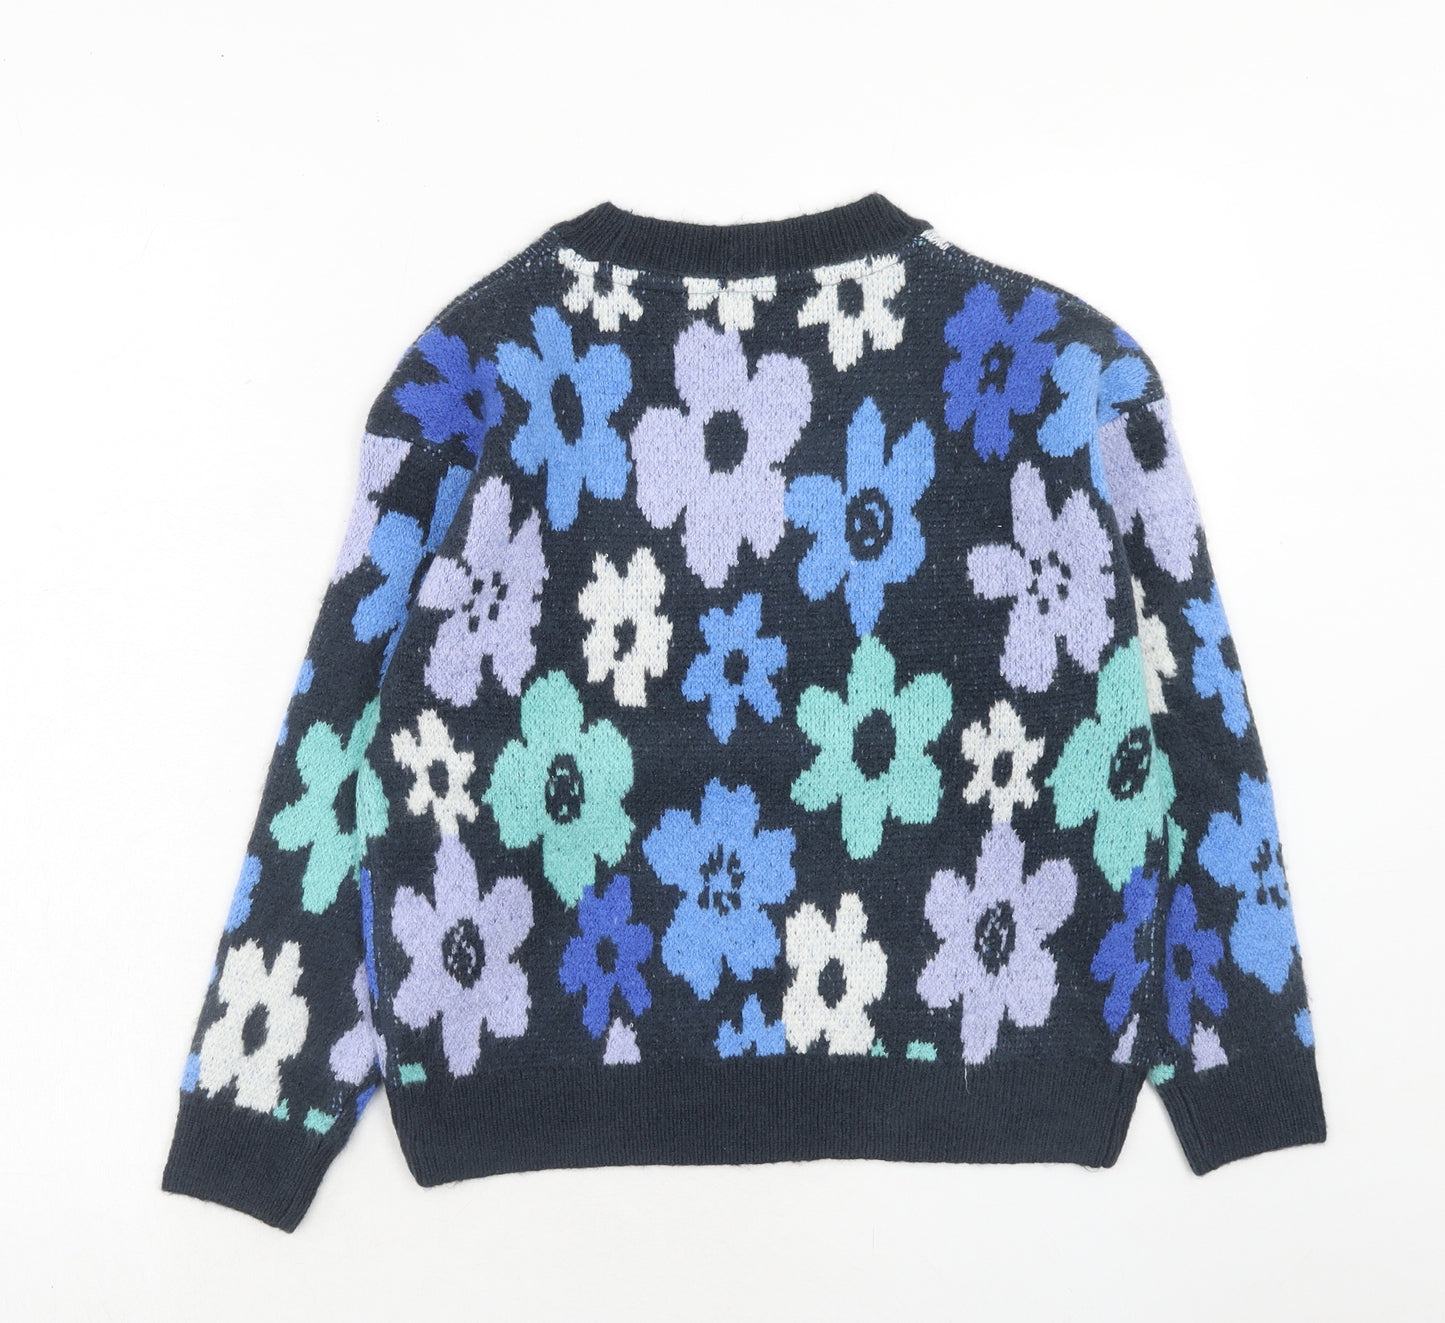 Marks and Spencer Girls Blue Round Neck Floral Acrylic Pullover Jumper Size 10-11 Years Pullover